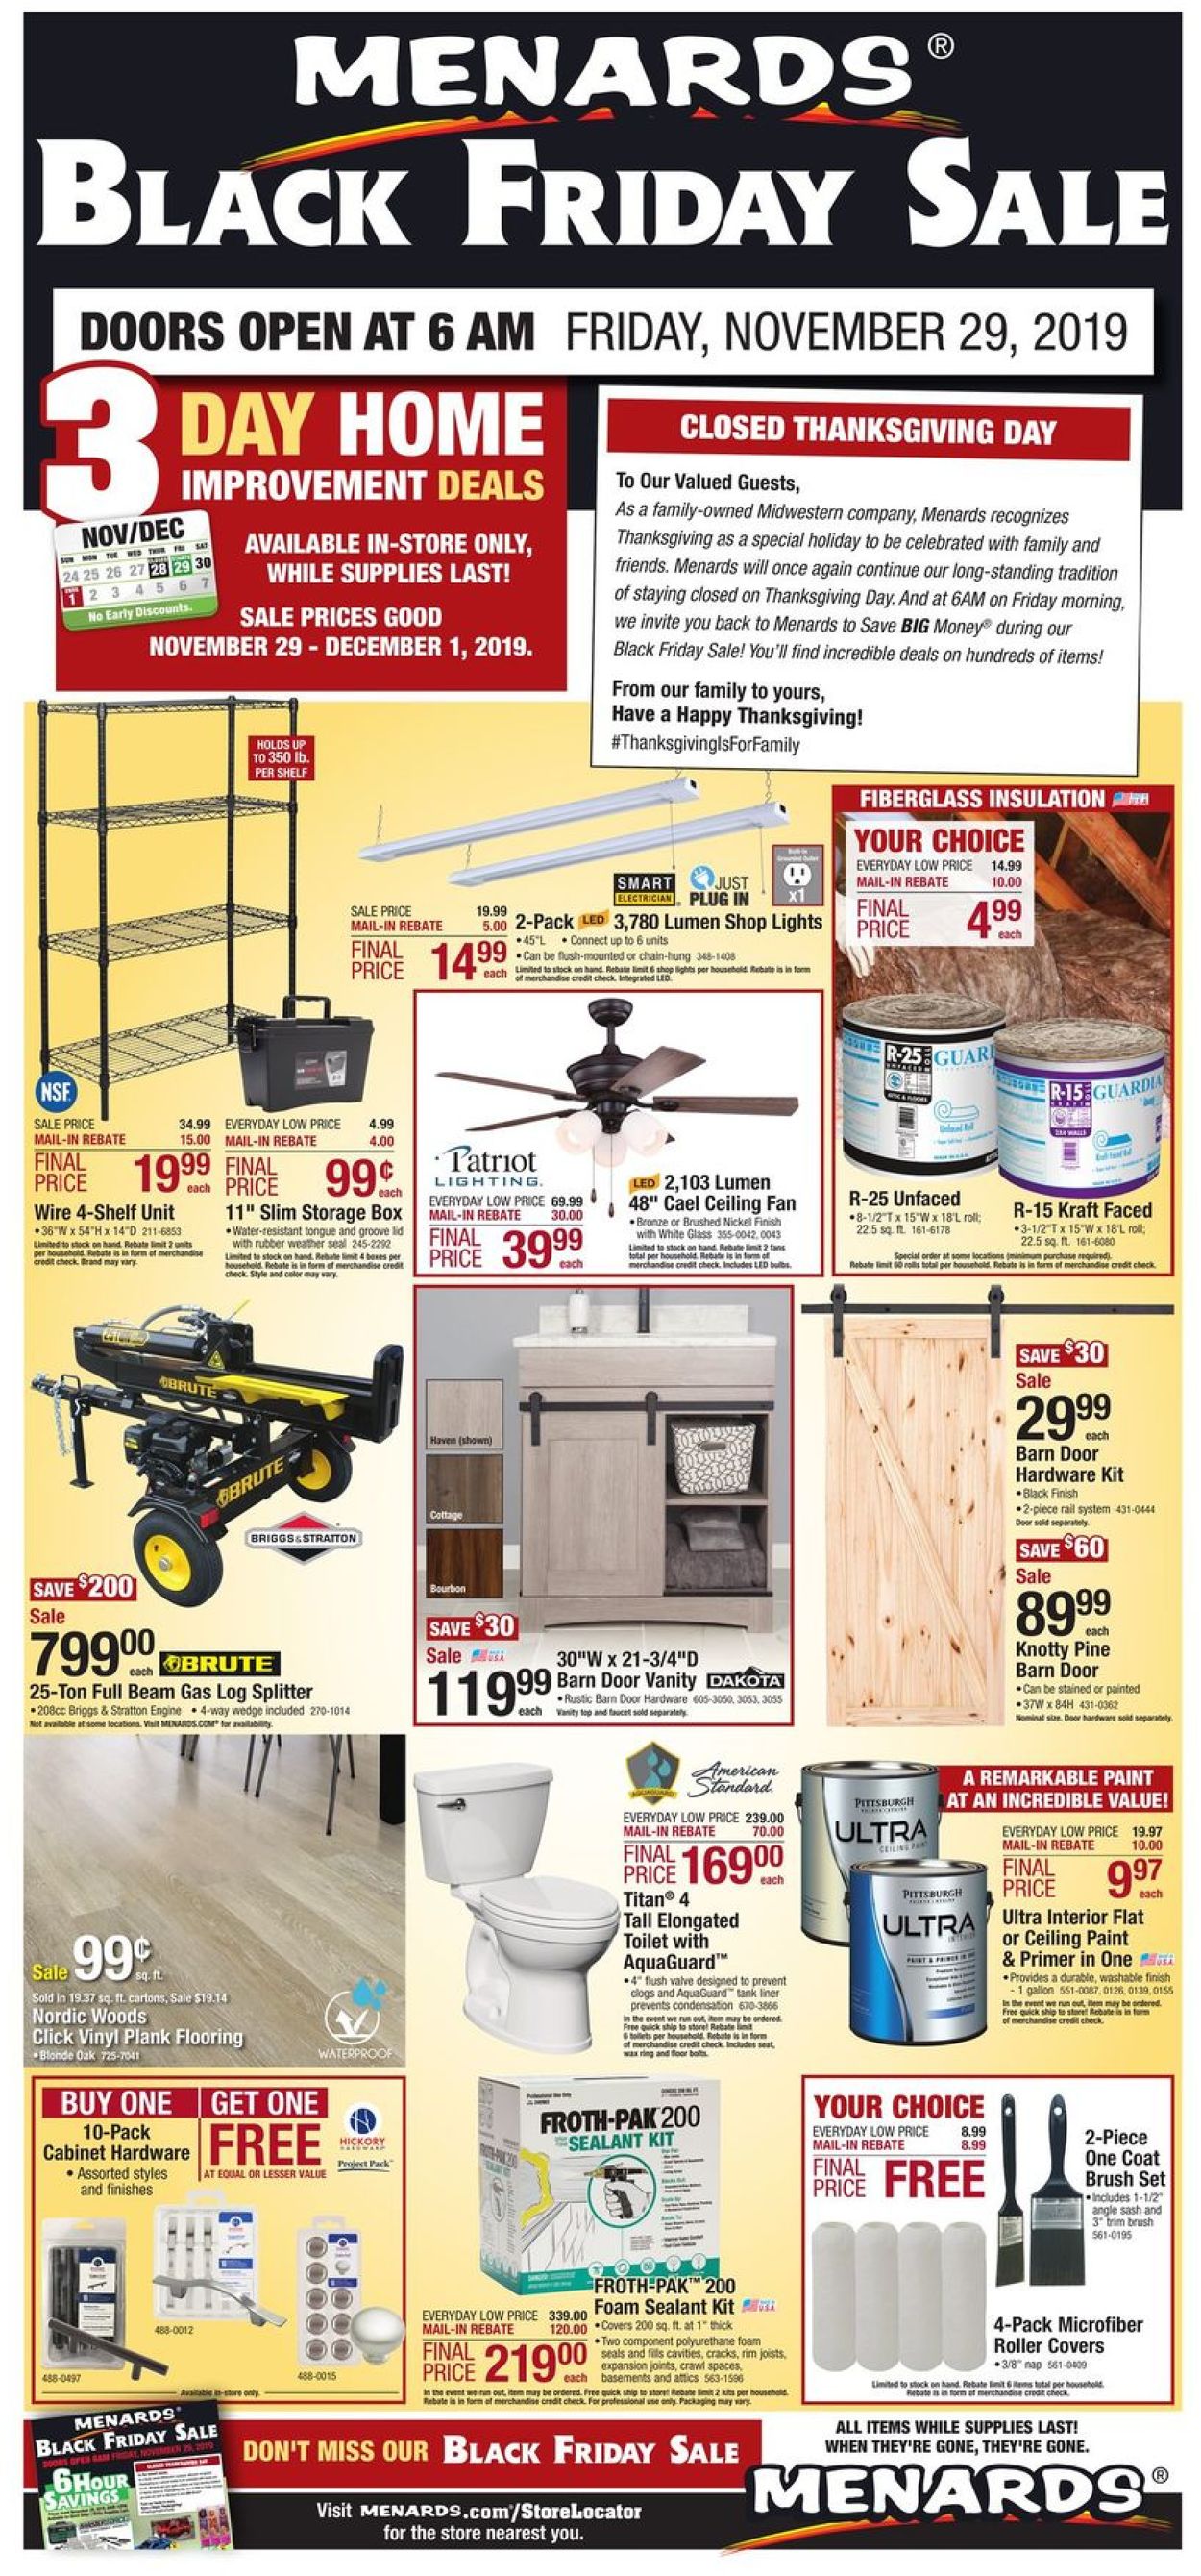 Menards - Black Friday Sale 2019 Current weekly ad 11/29 - 12/01/2019 - www.bagssaleusa.com/product-category/classic-bags/